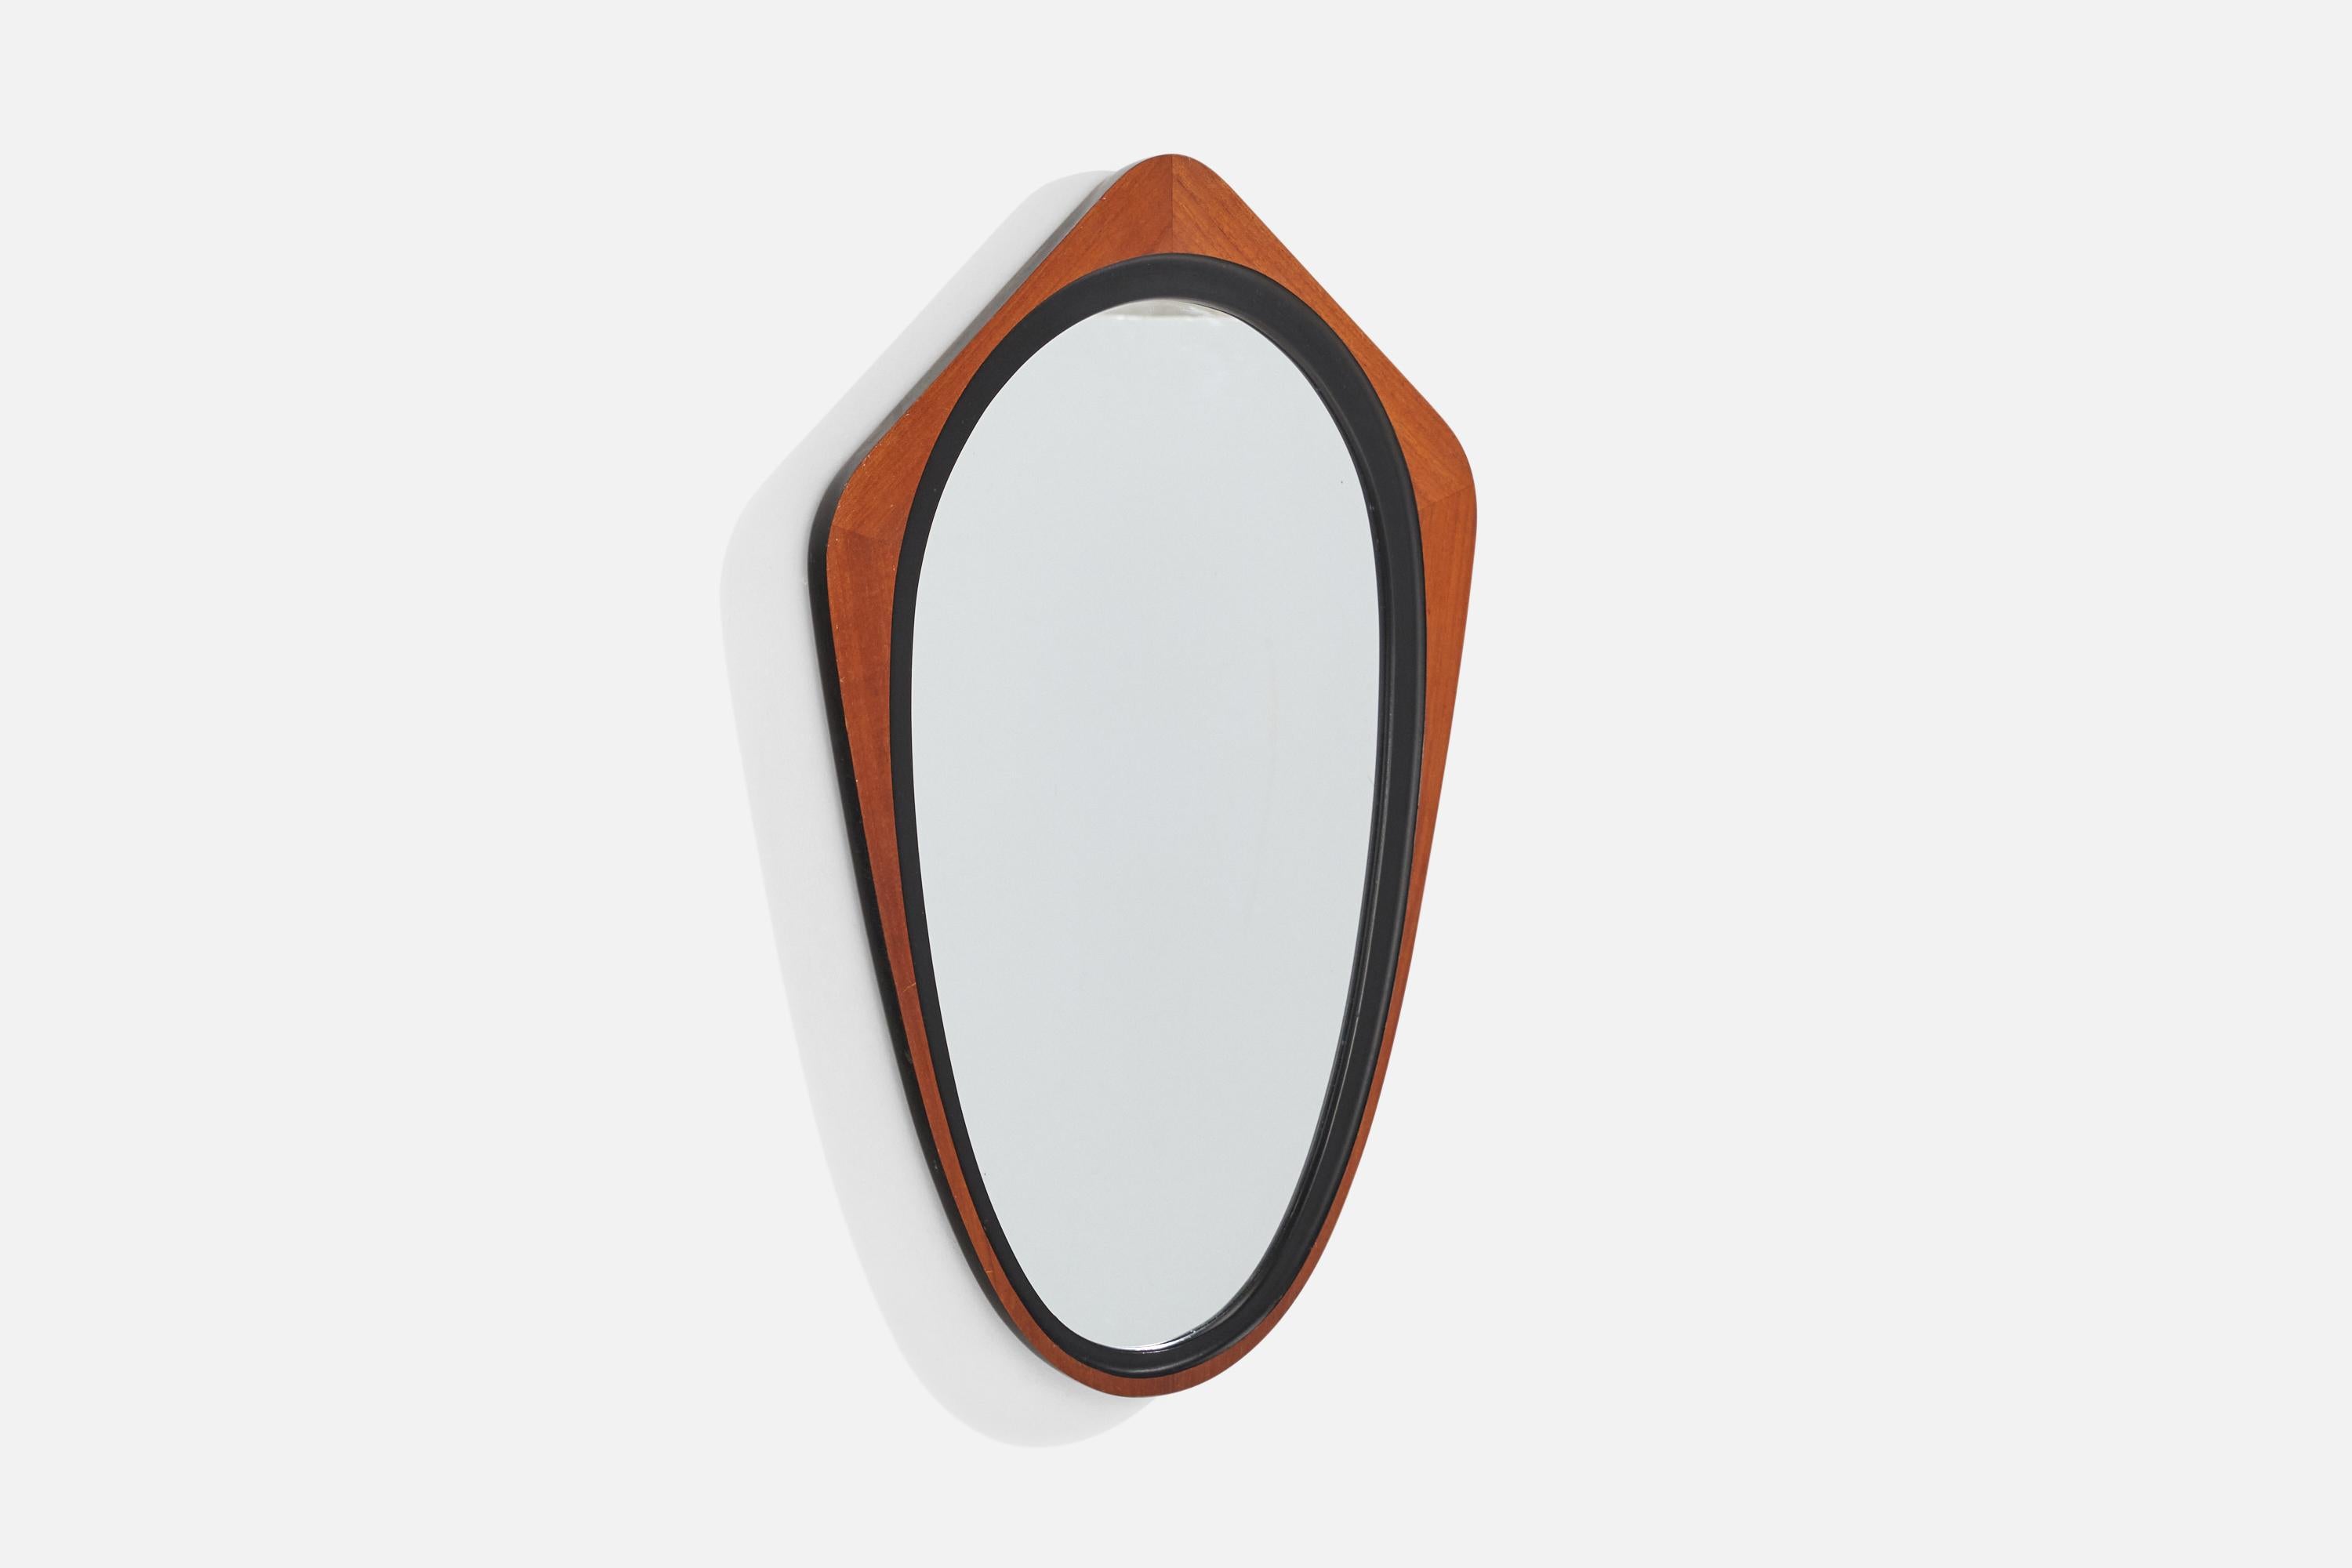 A rosewood and black-painted wood wall mirror designed by Glas & Trä and produced by Hovmantorp, Sweden, 1950s.